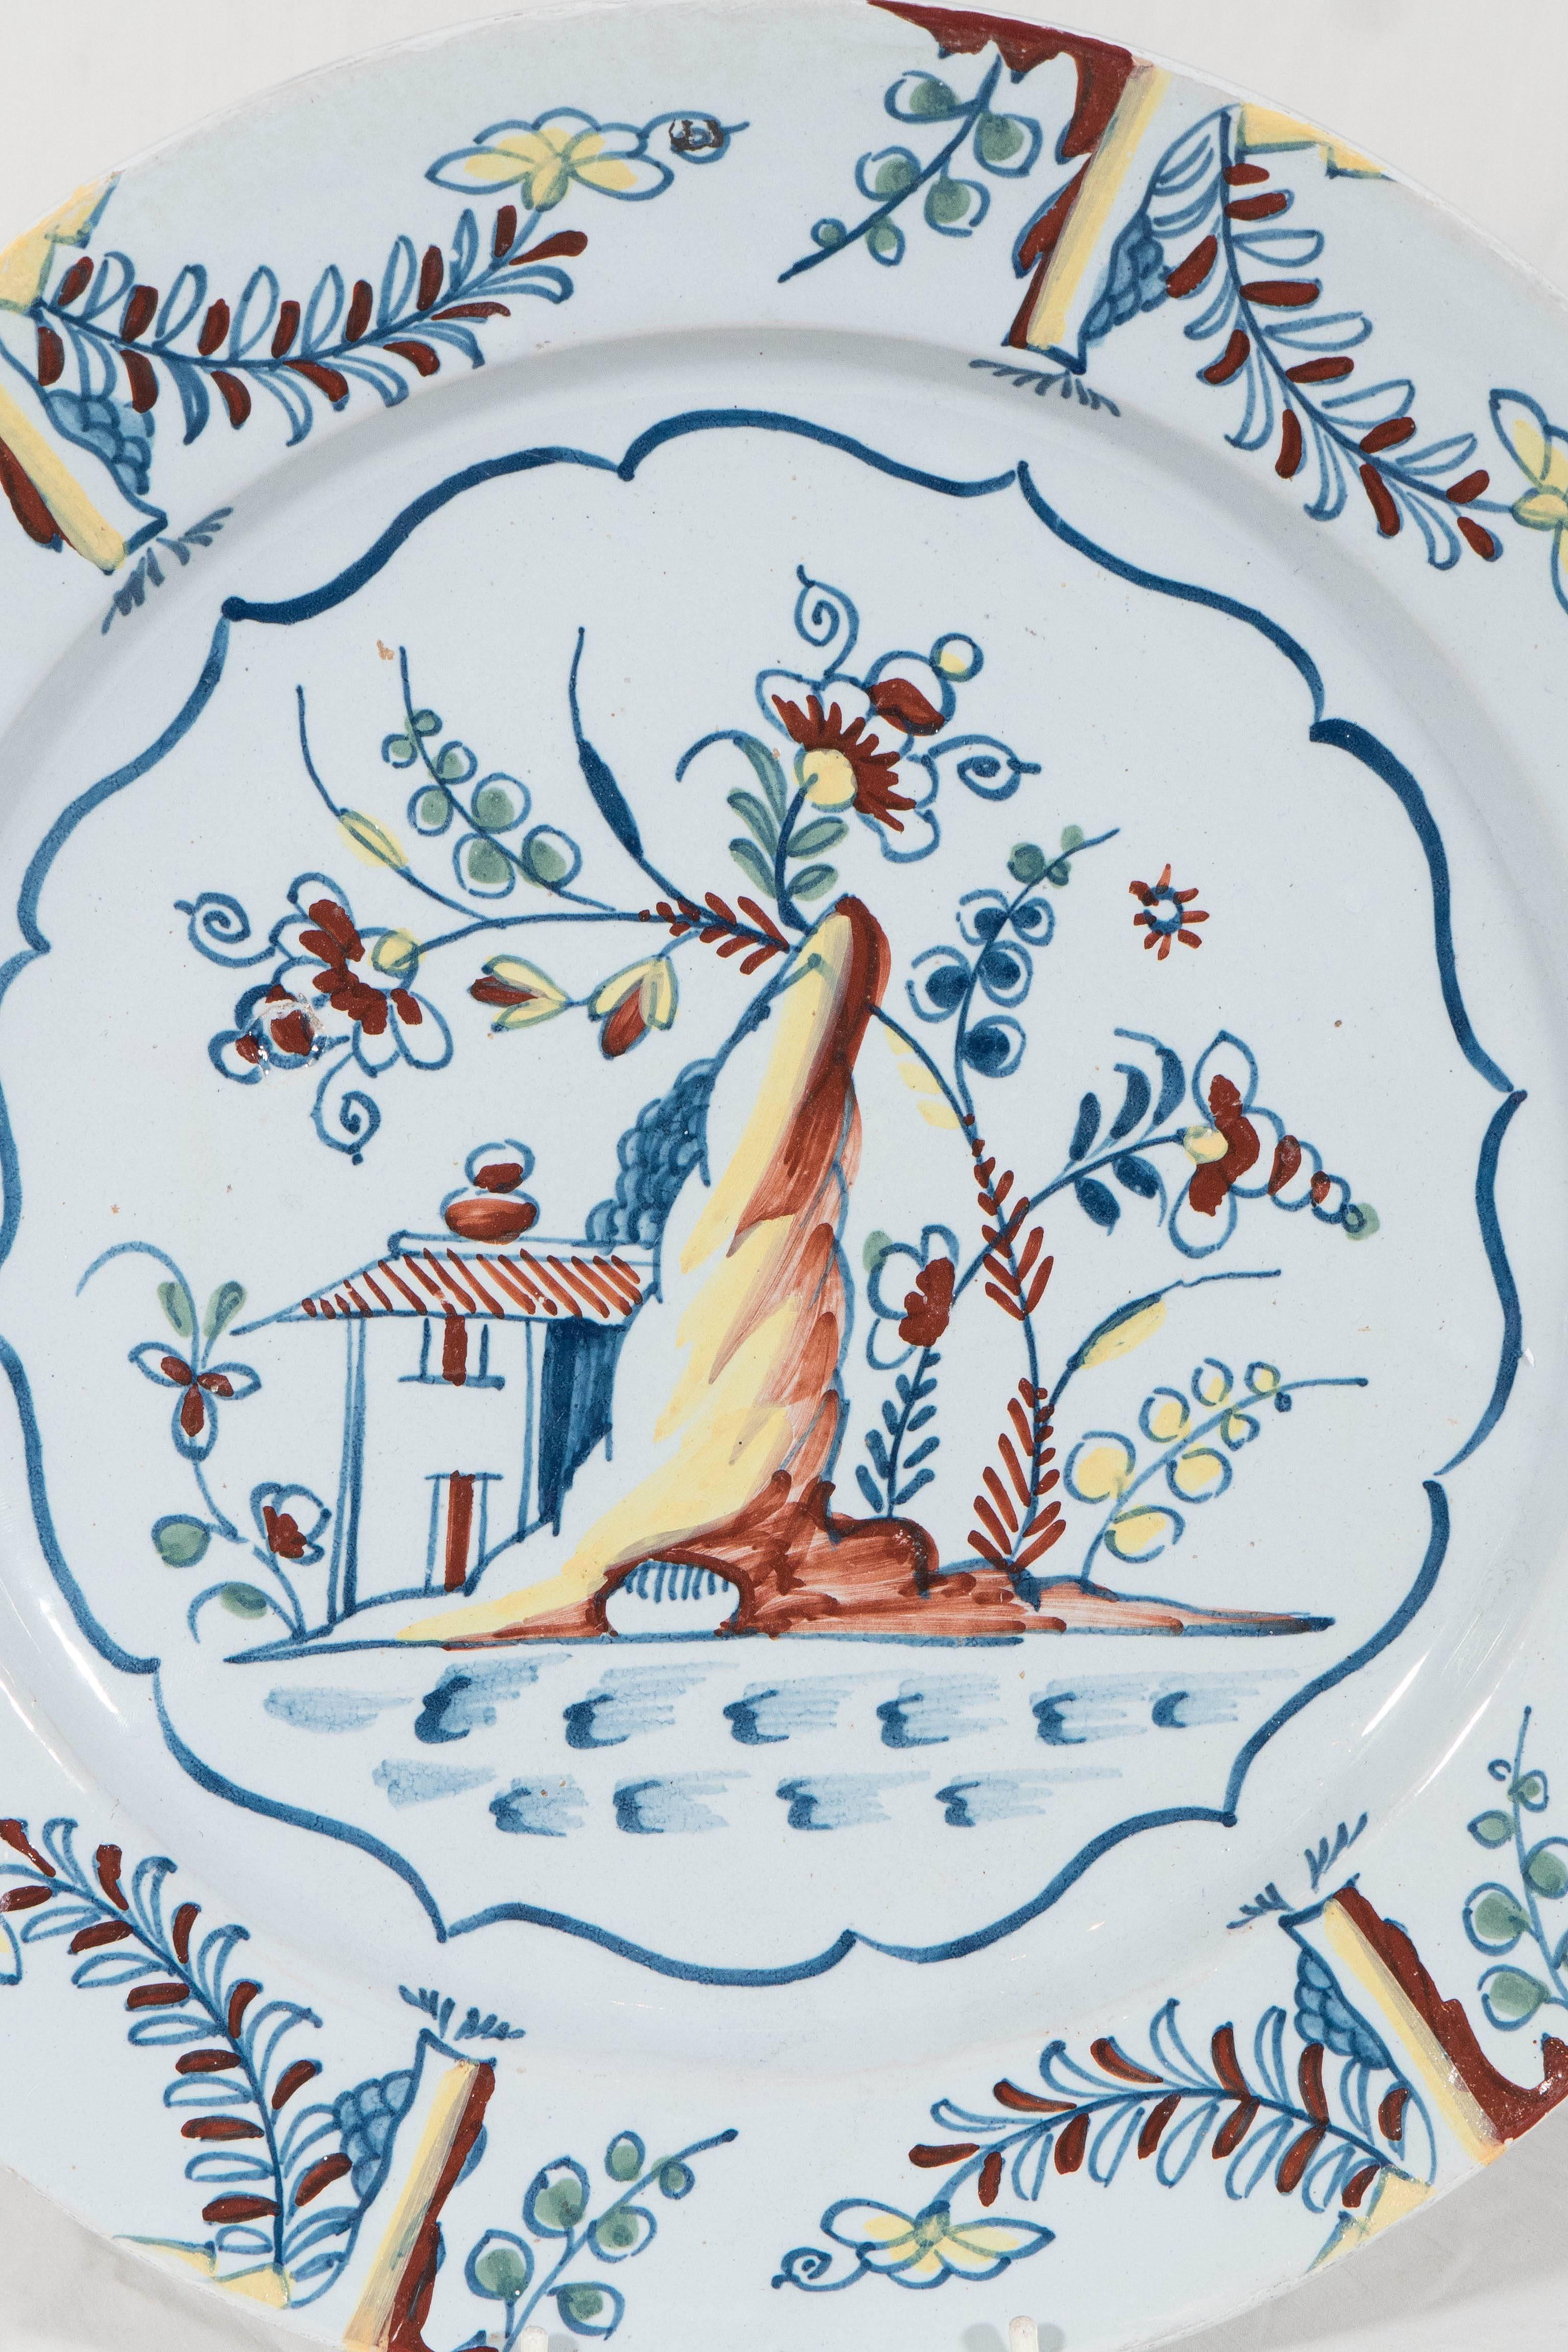 We are pleased to offer this lovely mid-18th century Bristol Delft charger with the well painted vibrant scene. We see a traditional country home, a flowering tree, and a rocky outcropping. The scene features  the polychrome colors in use at